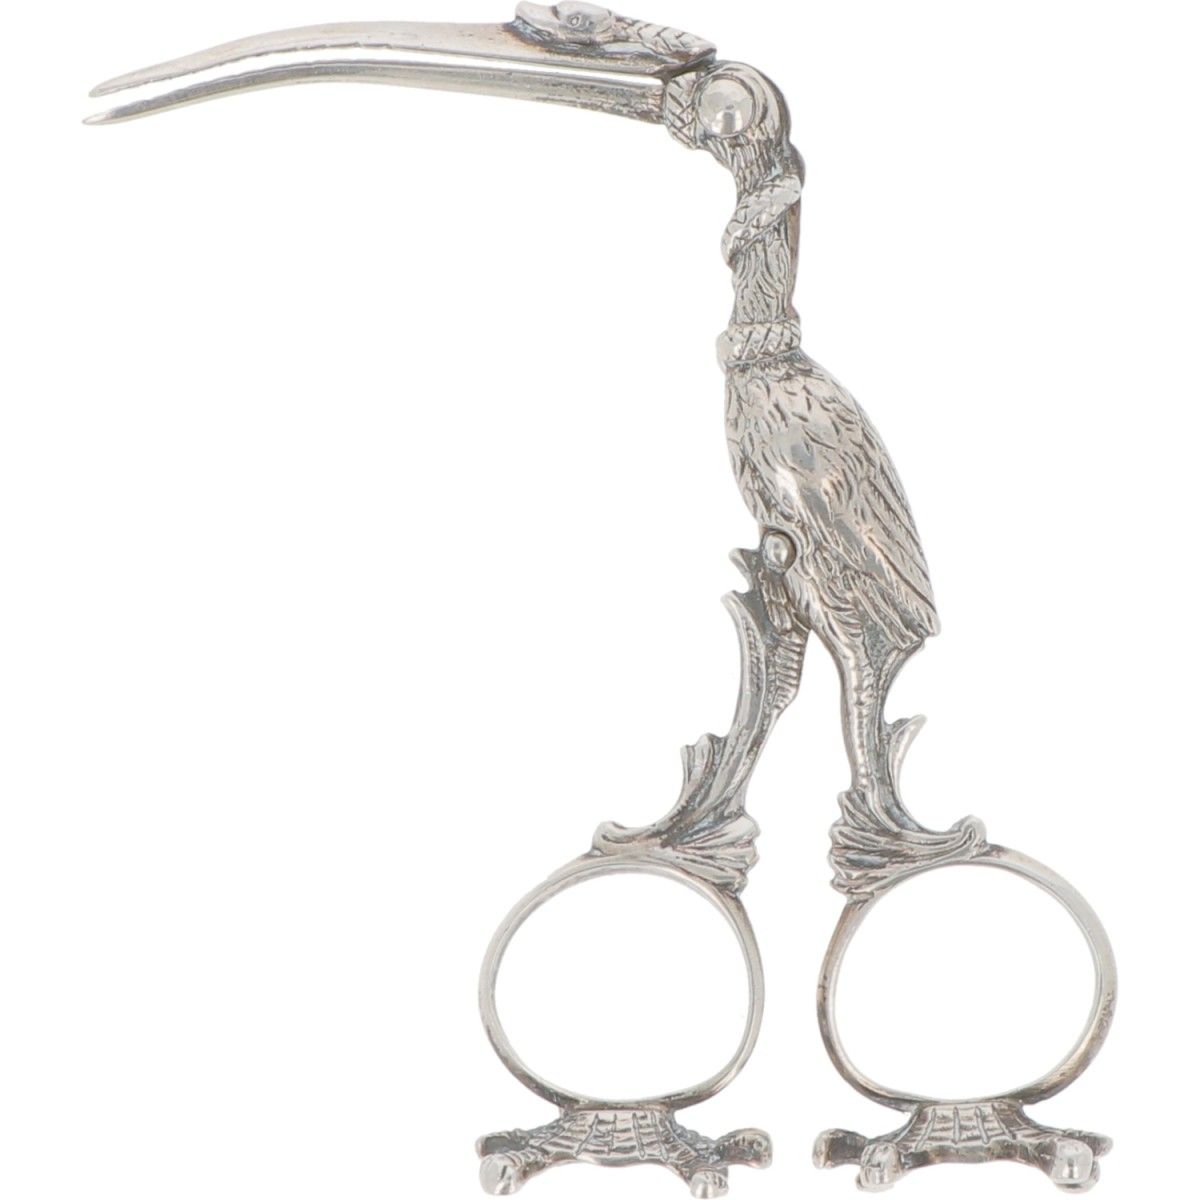 Diaper pliers (also called umbilical pliers) in the shape of a stork standing on&hellip;